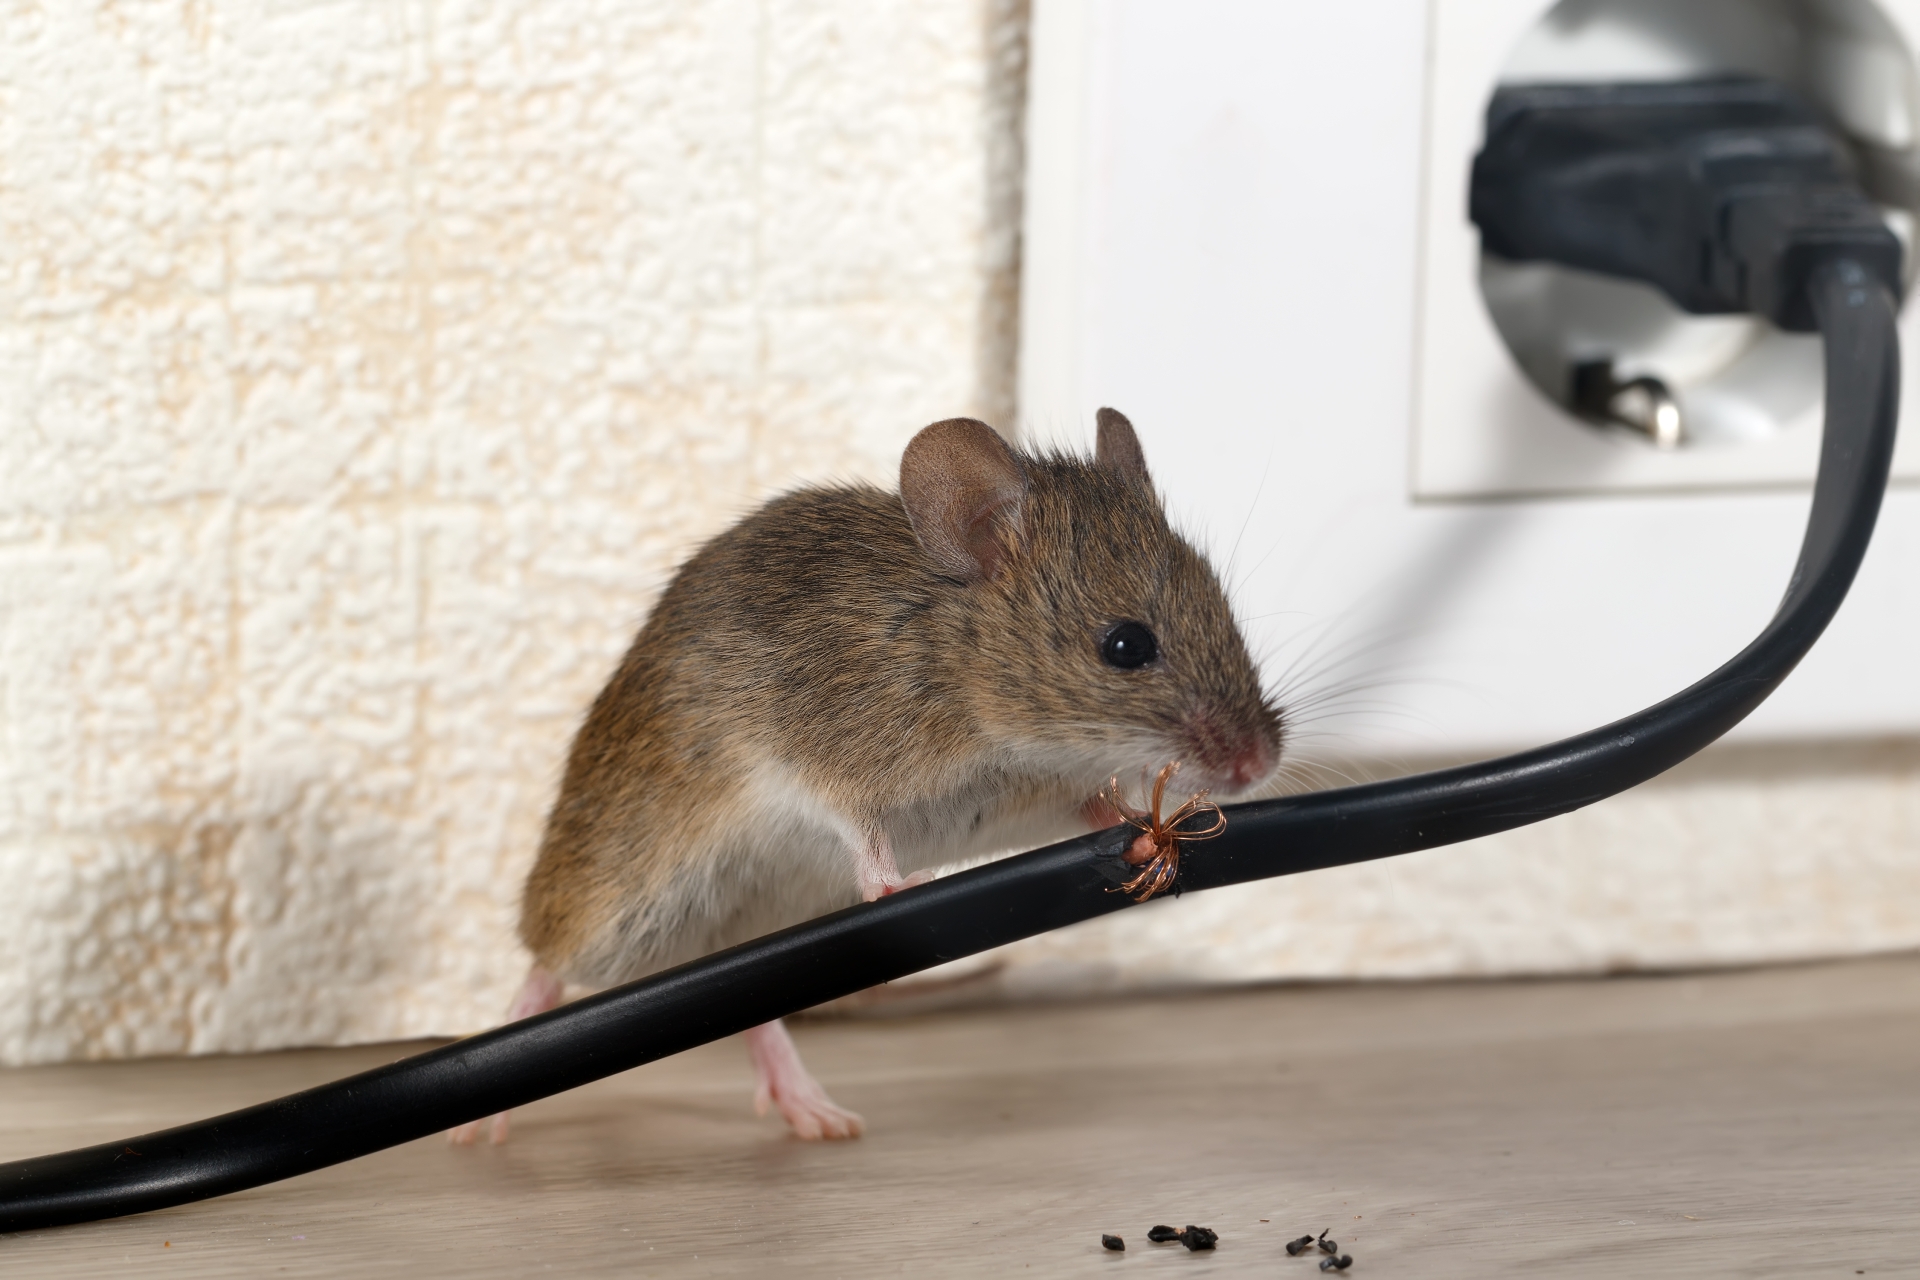 Mice Infestation, Pest Control in Enfield, EN1. Call Now 020 8166 9746